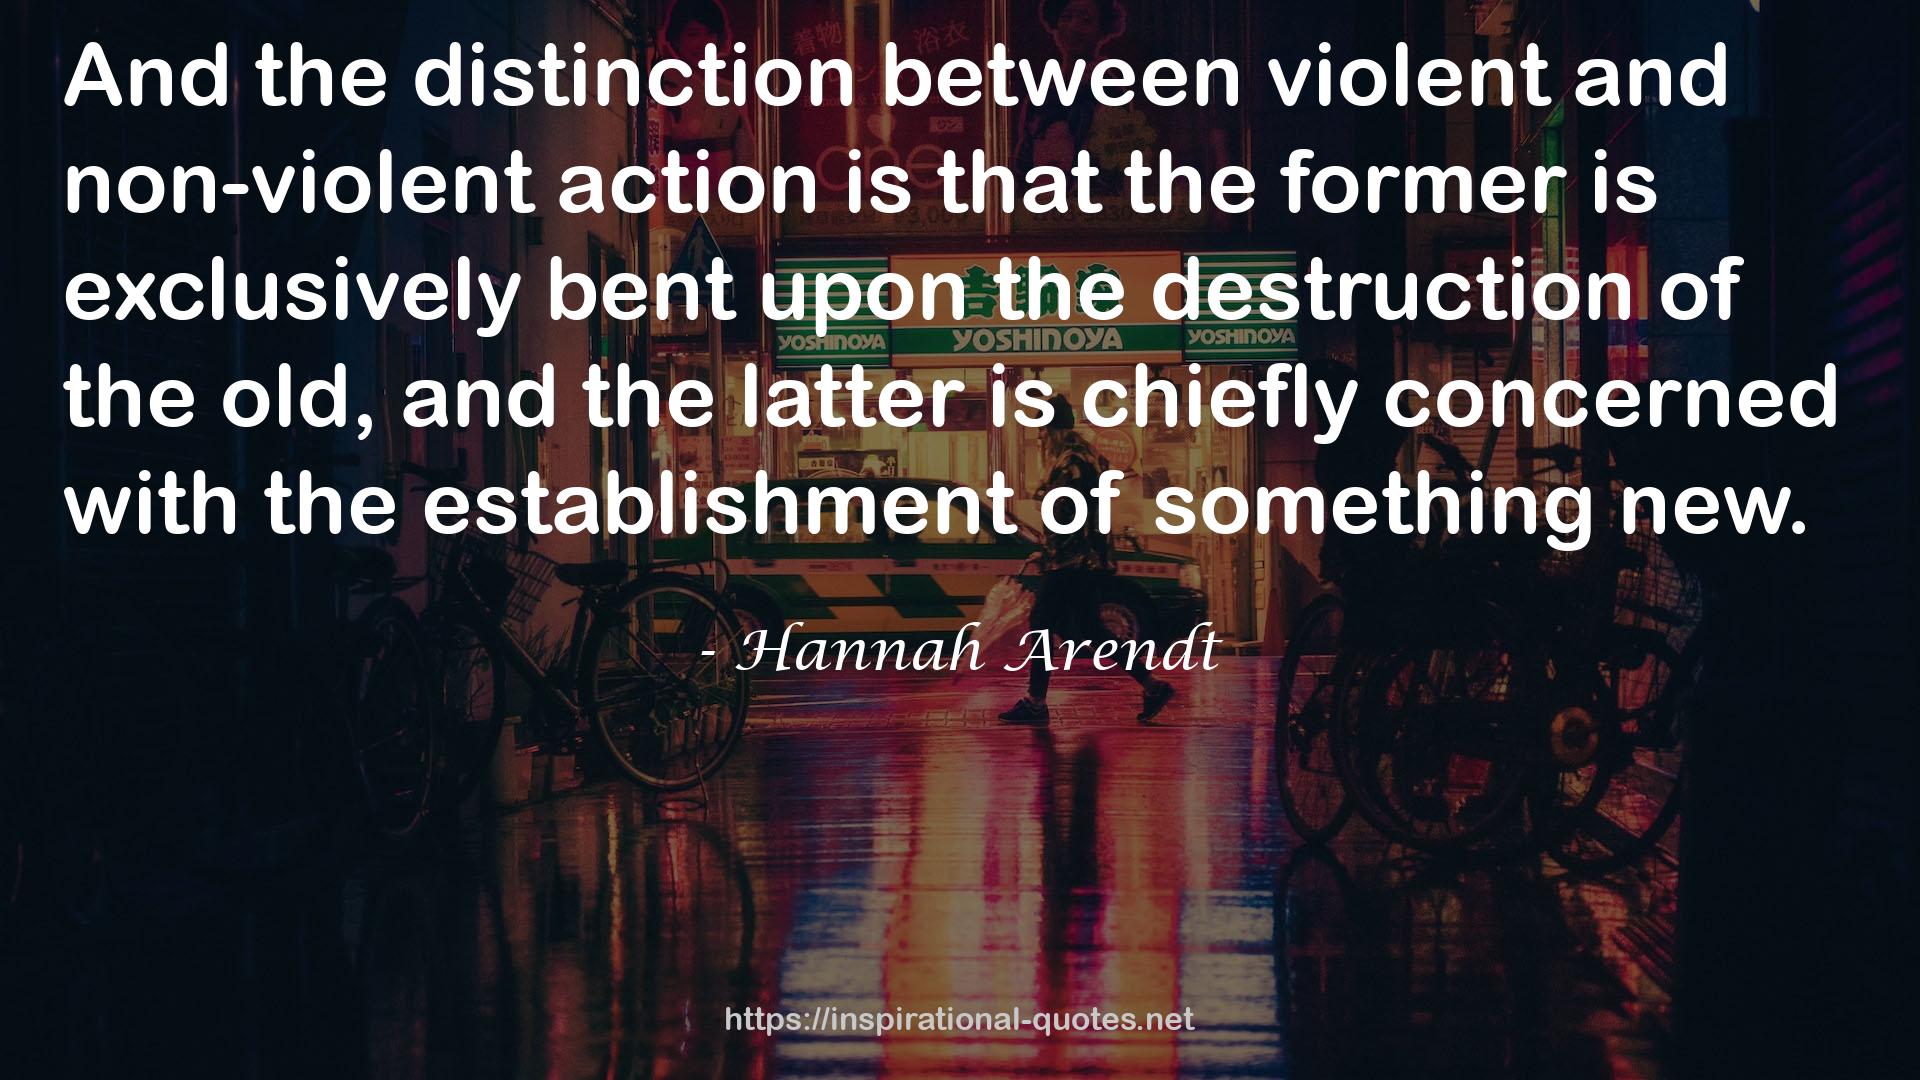 Hannah Arendt QUOTES